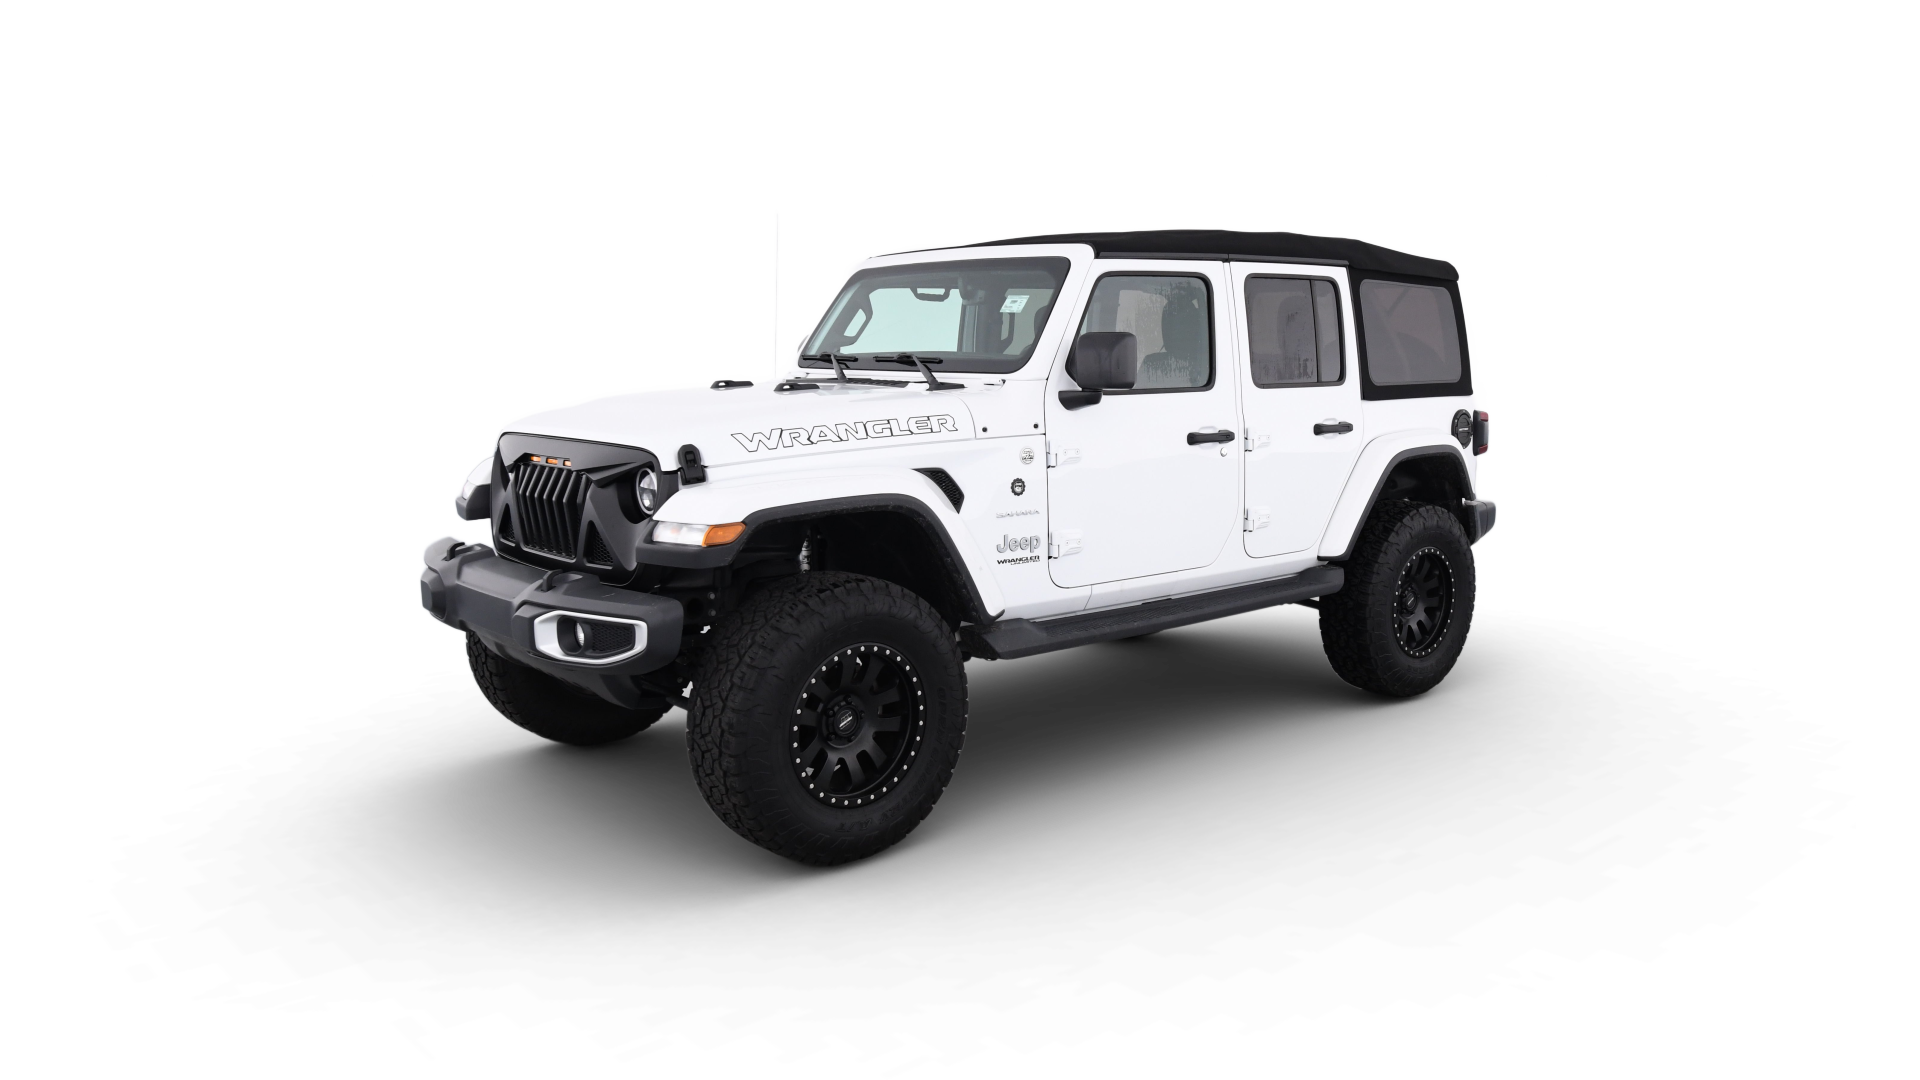 2007 Wrangler Unlimited Clearance Selling, Save 70% 